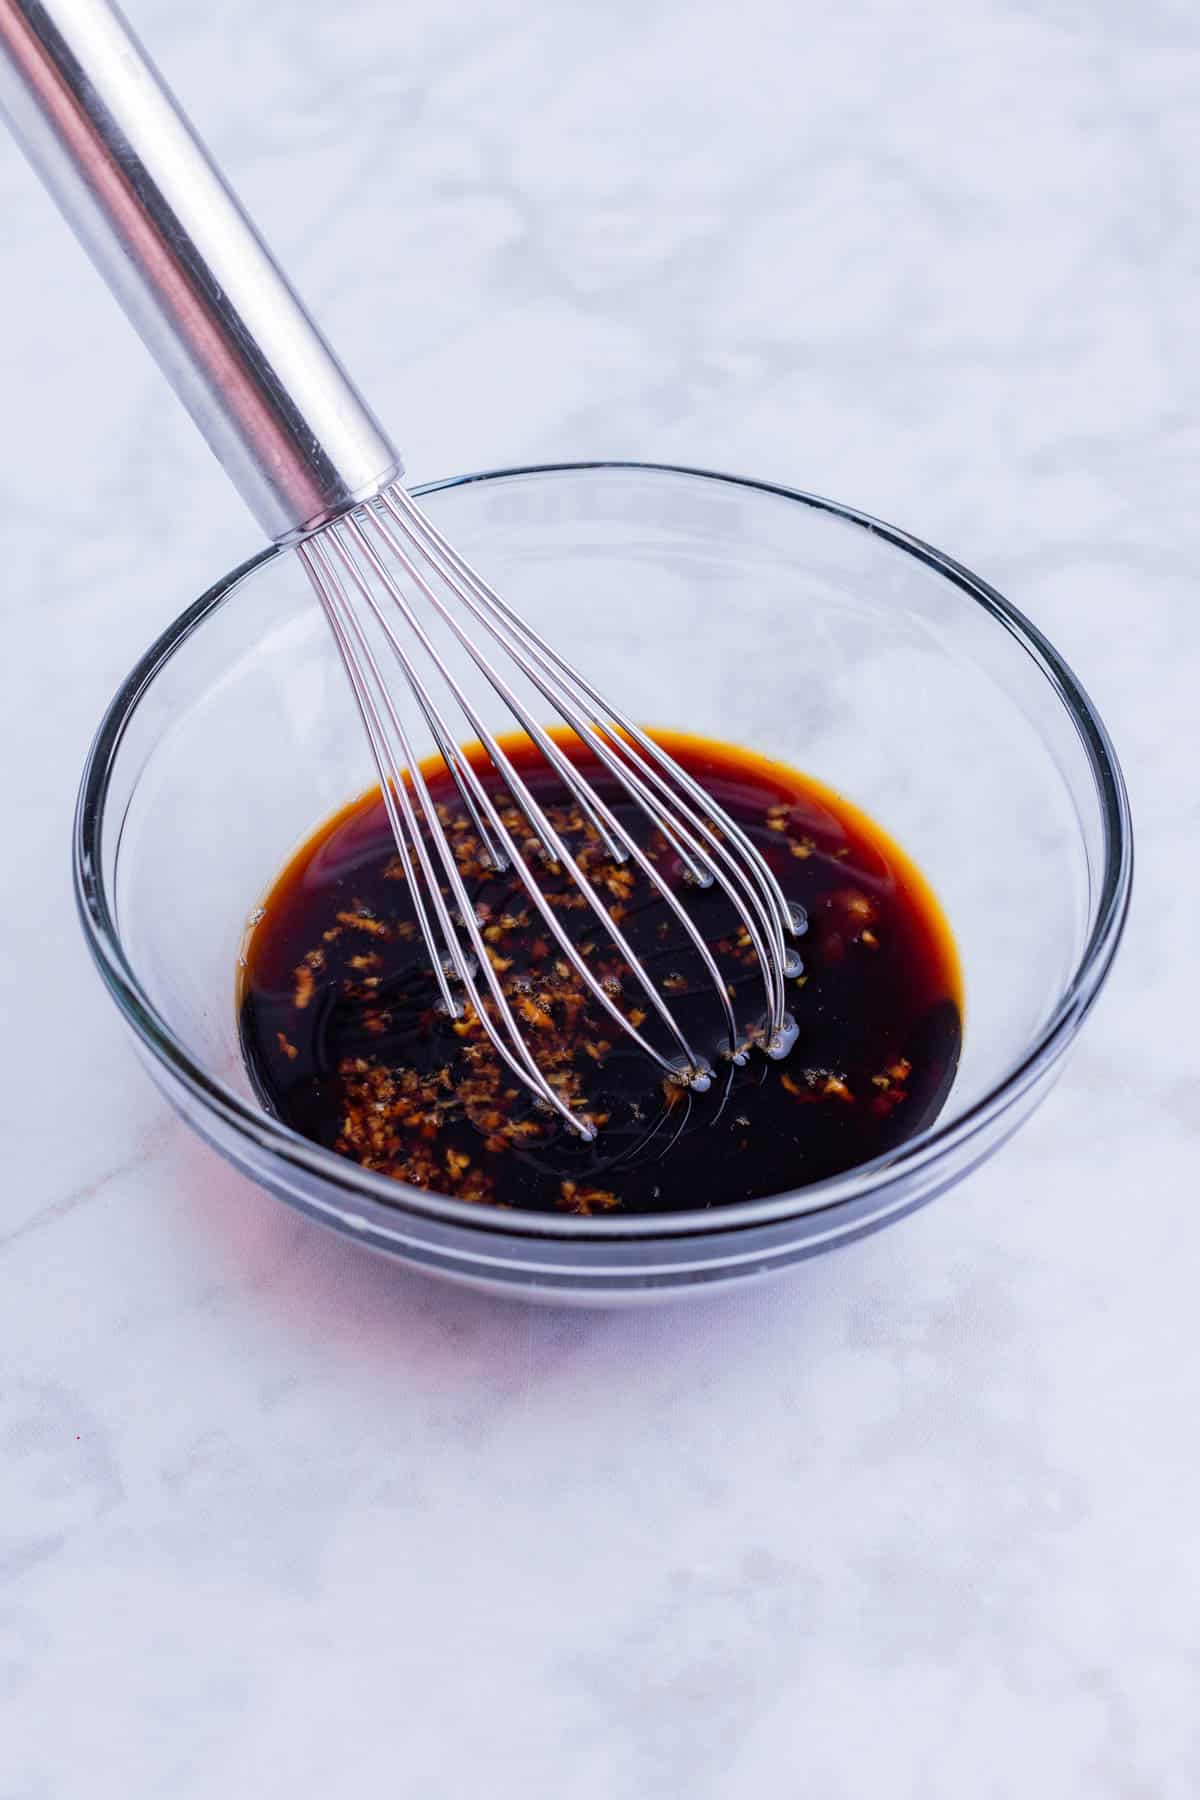 The teriyaki sauce is whisked together.